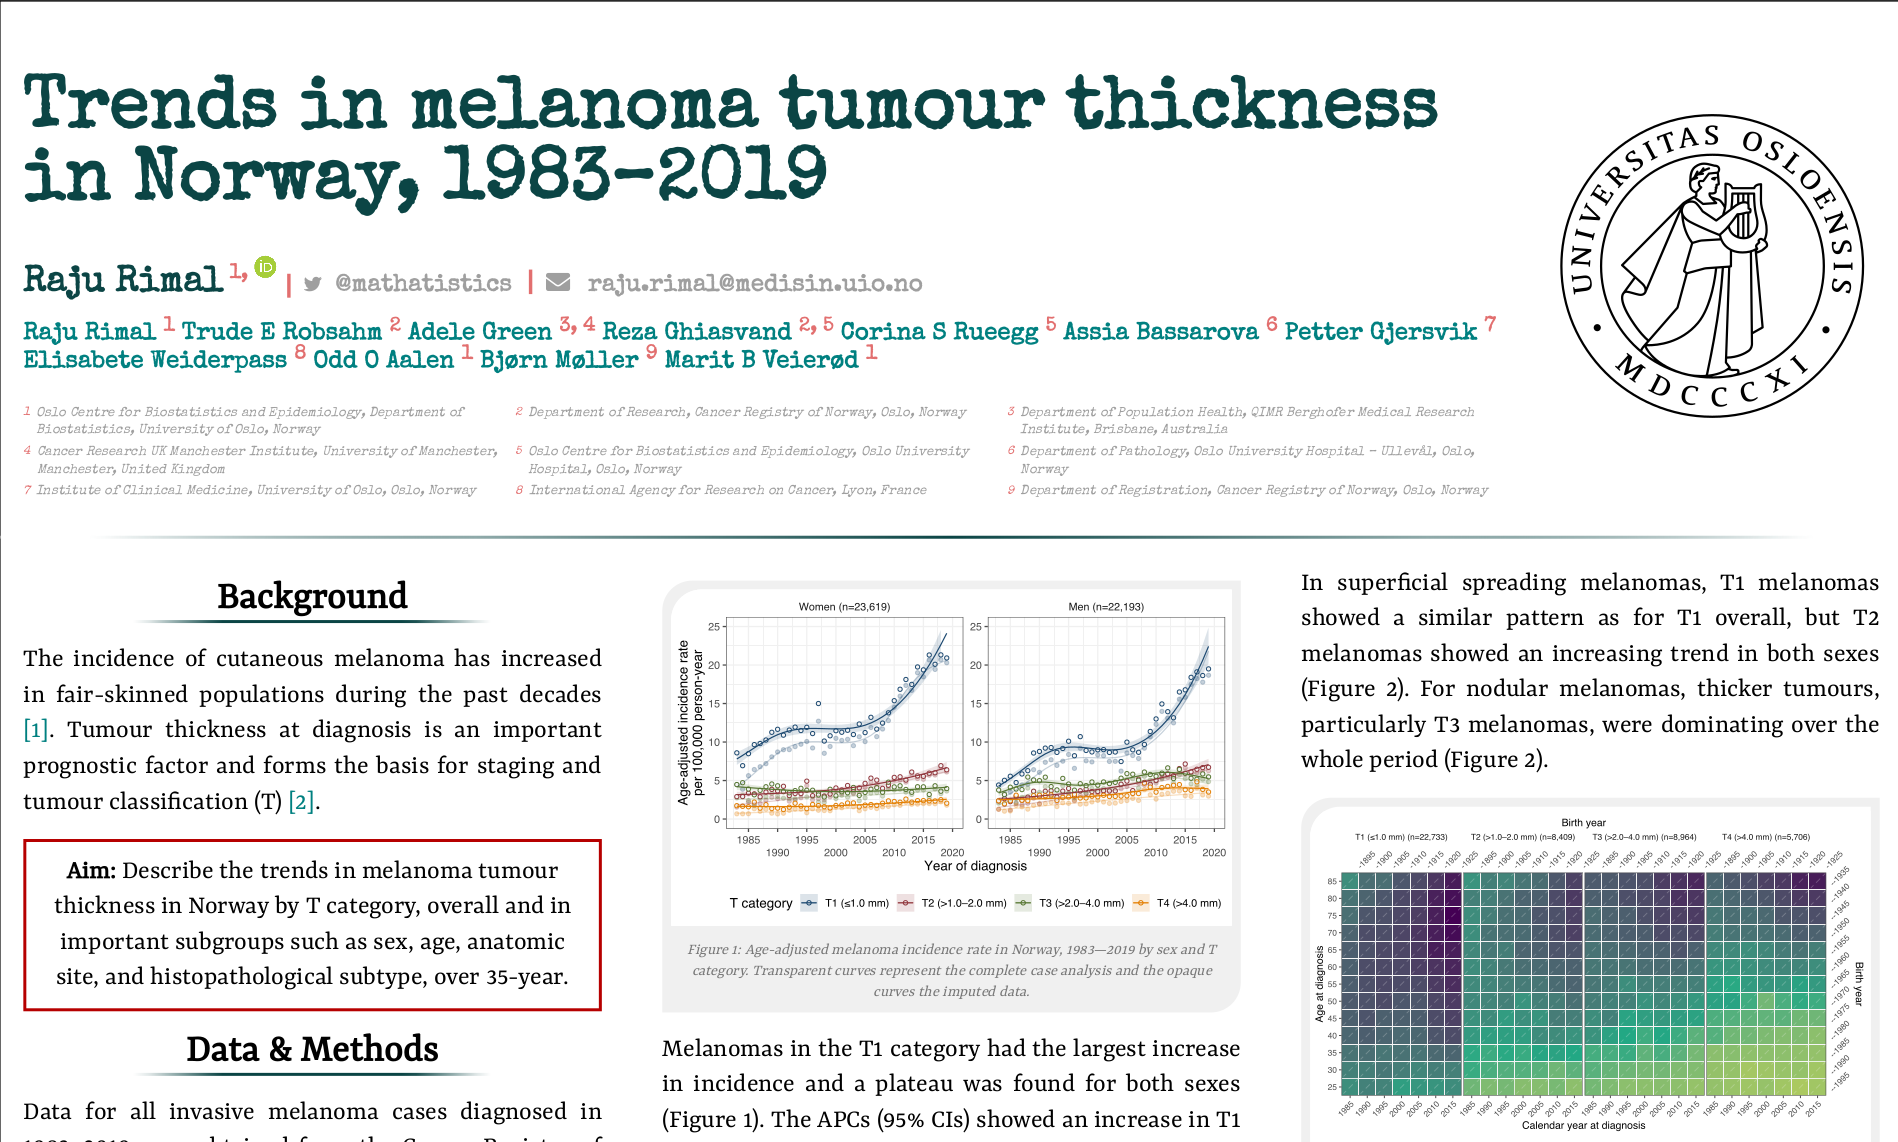 Trends in melanoma tumour thickness in Norway, 1983--2019